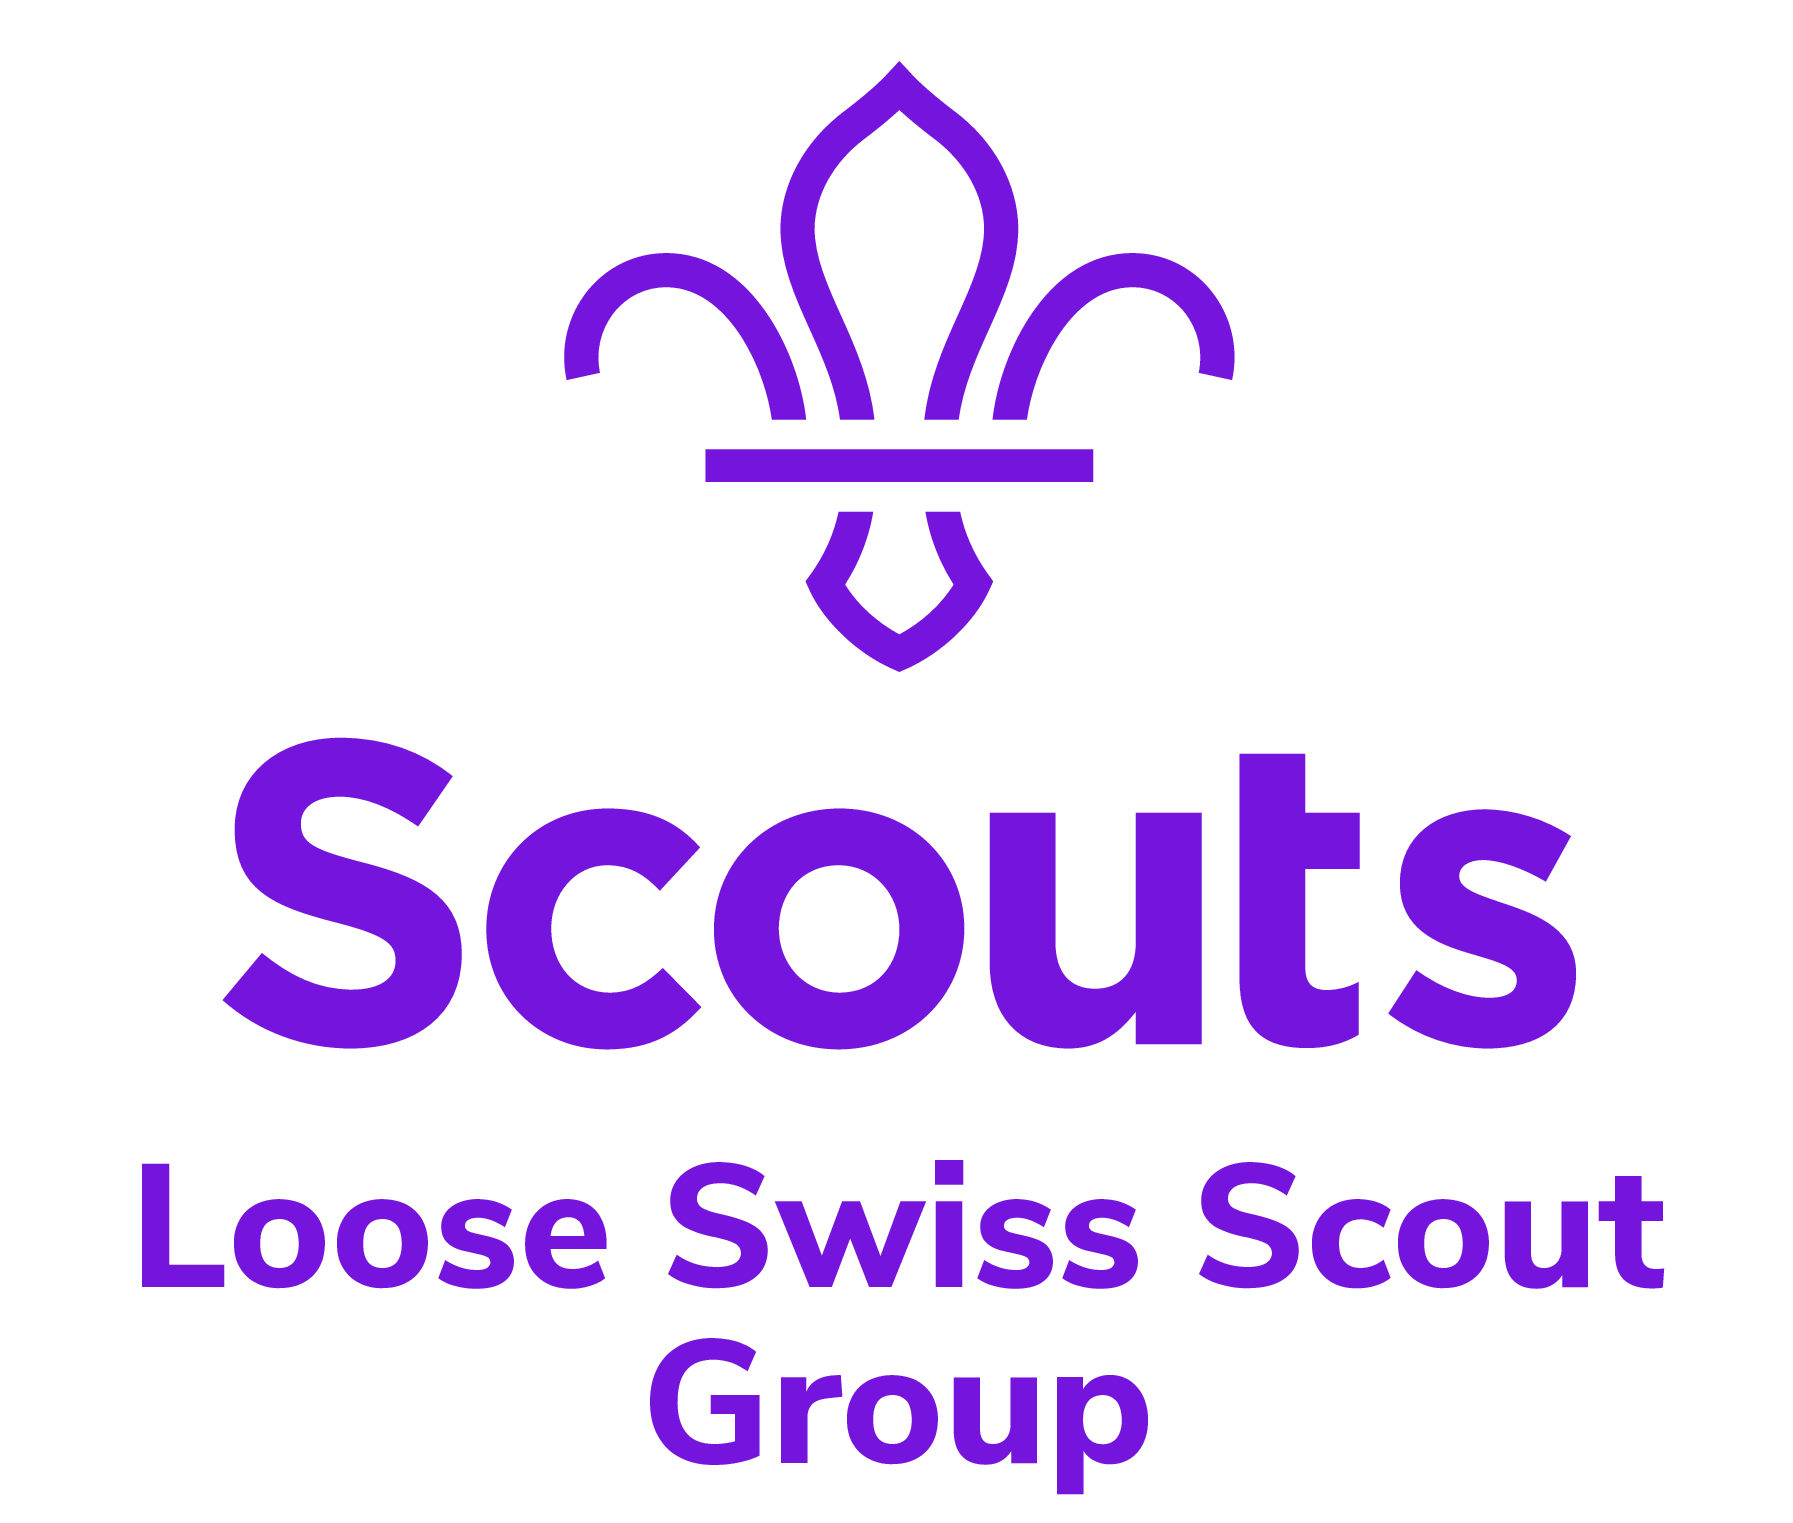 Loose Swiss Scout Group